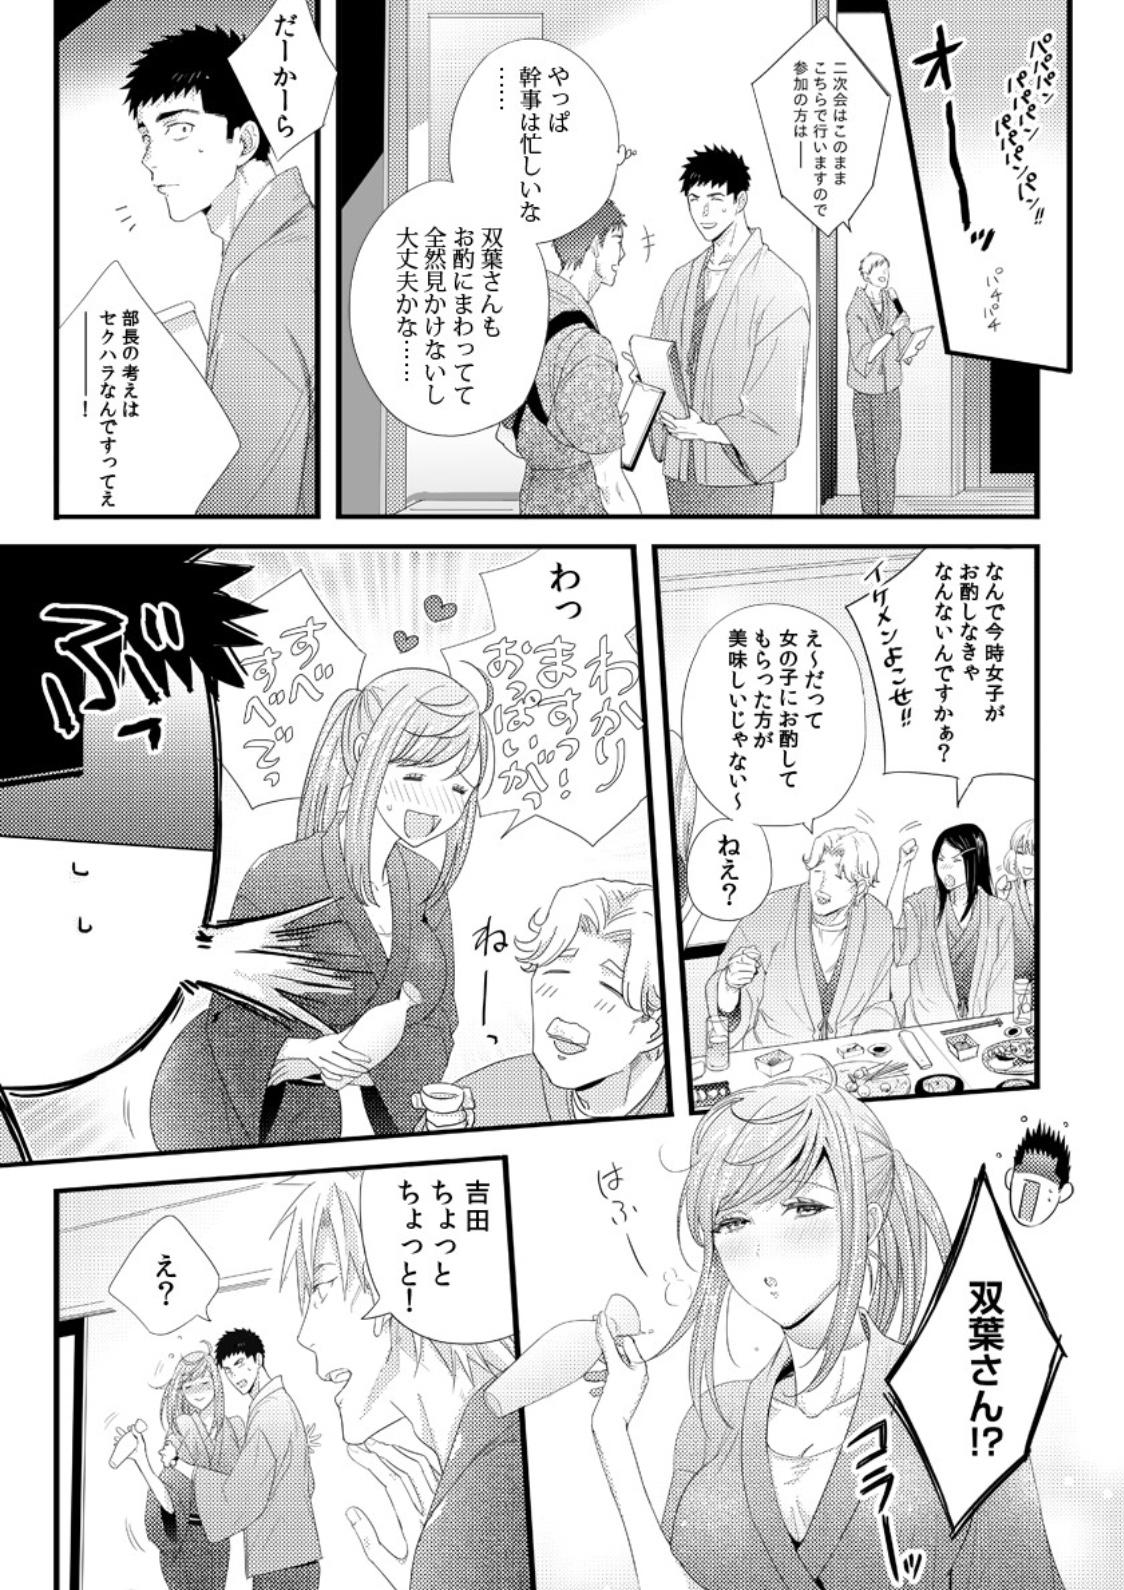 Please Let Me Hold You Futaba-San! Ch. 1+2 10